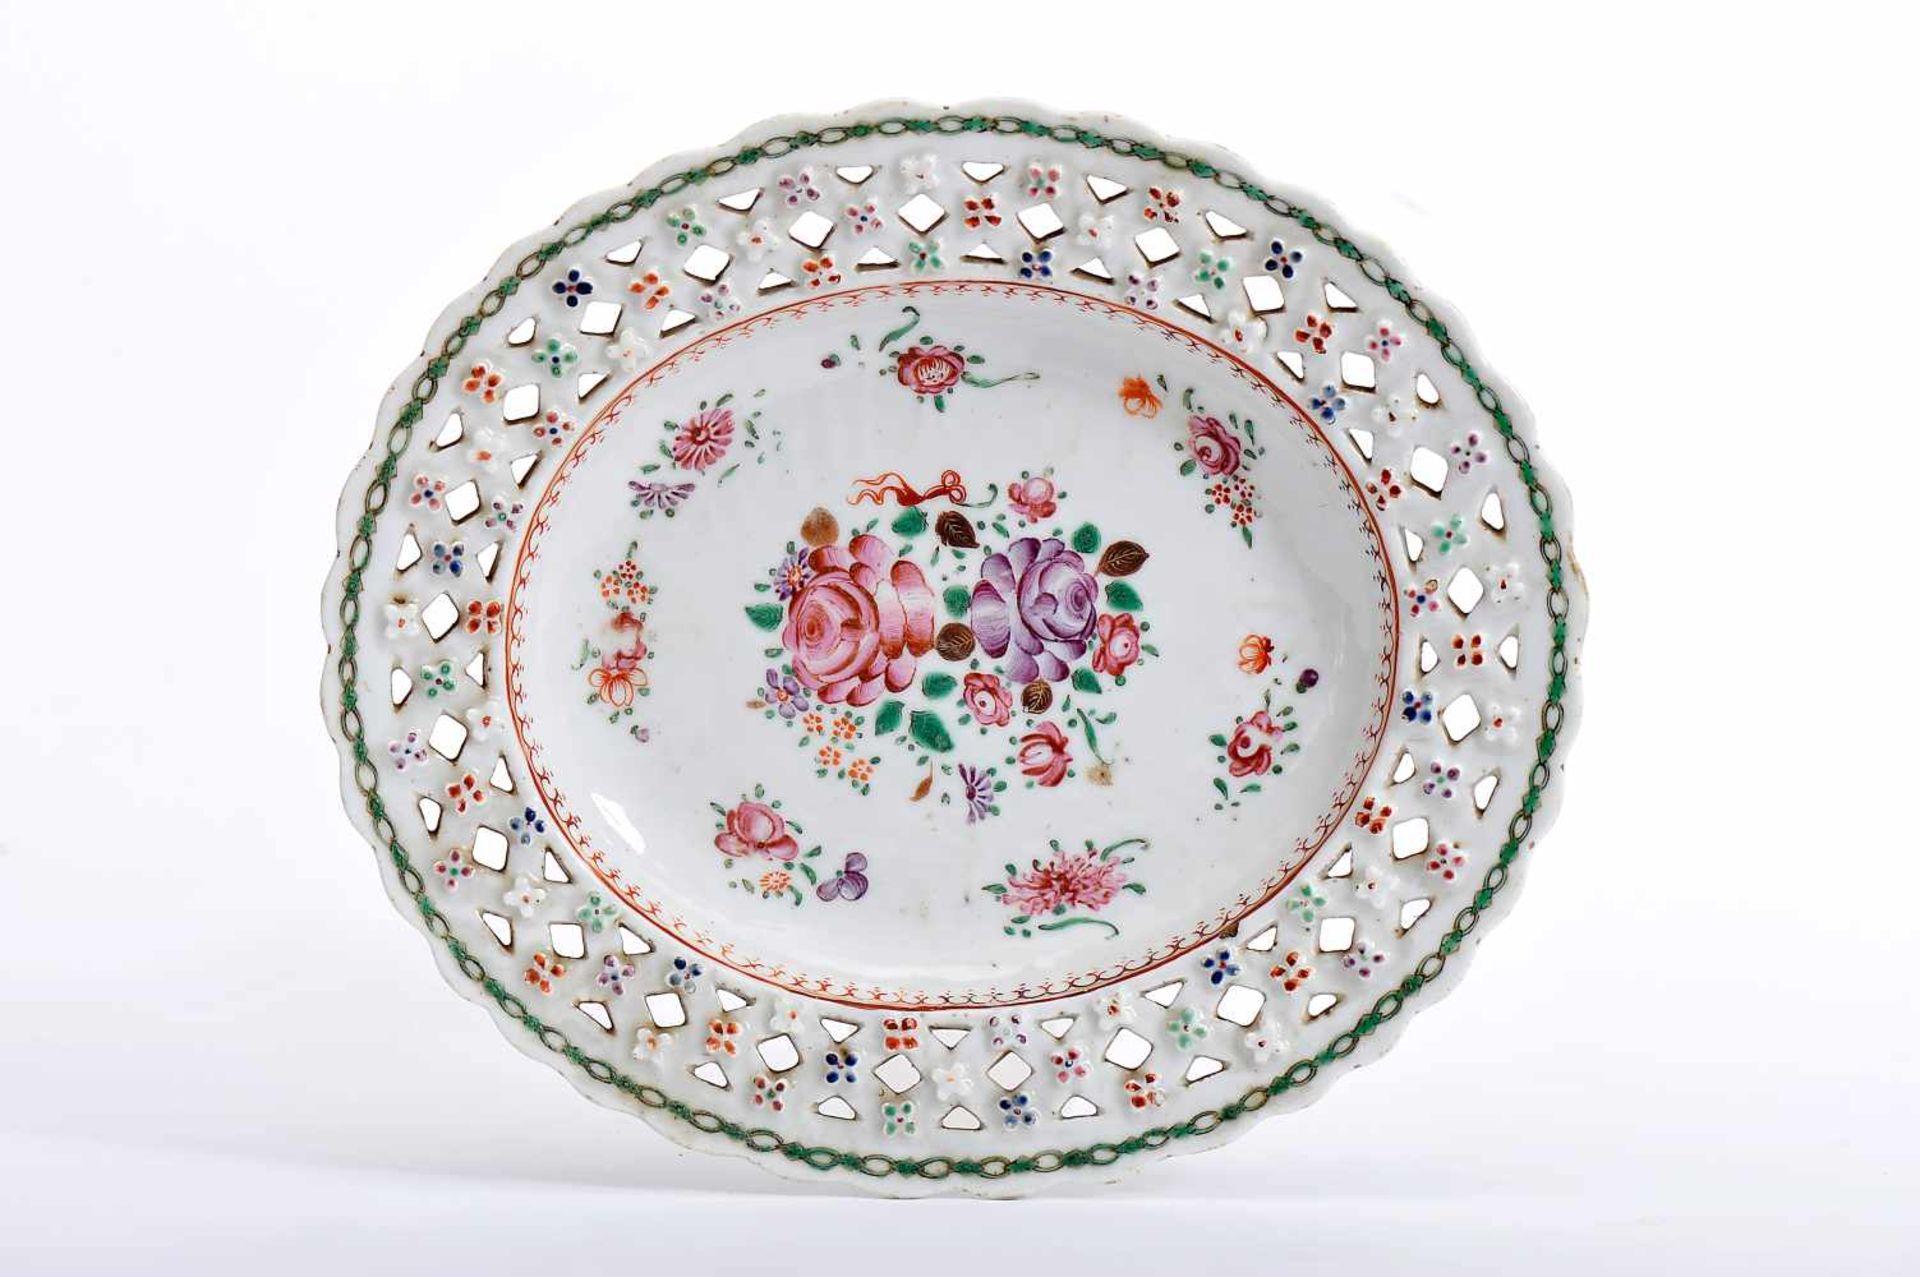 An Oval Platter, Chinese export porcelain, polychrome and gilt decoration "Flowers", pierced rim